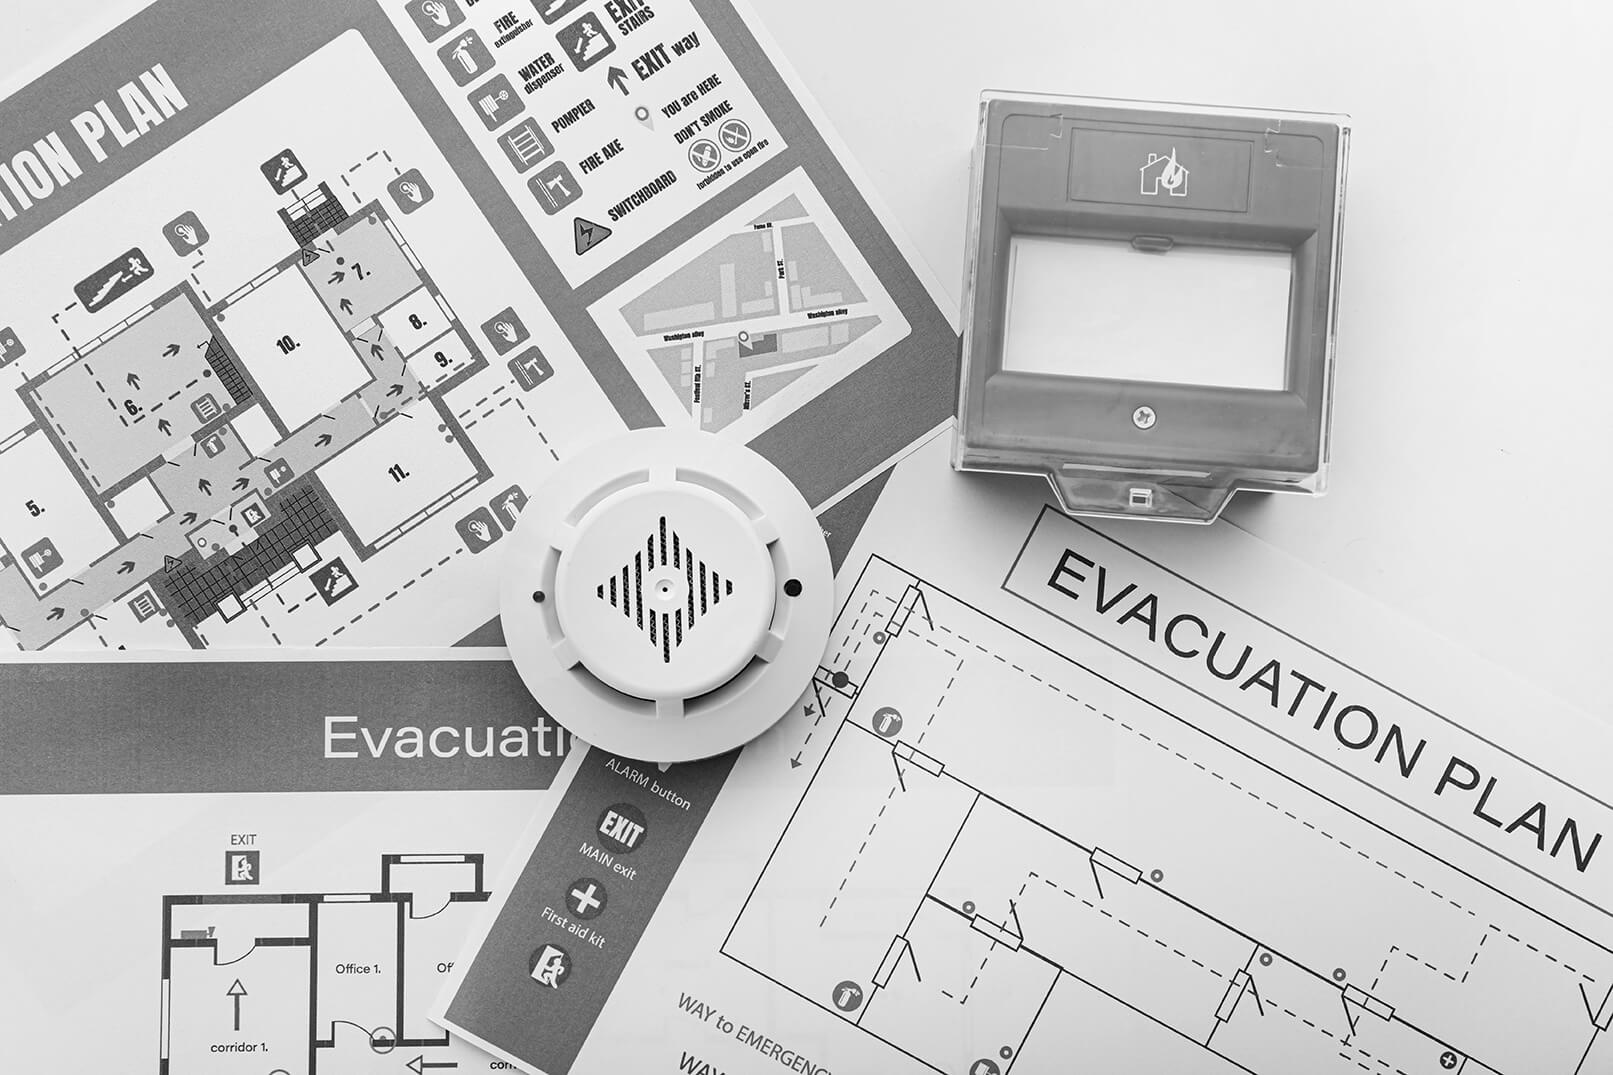 Evacuation plans, smoke detector and manual call point on white